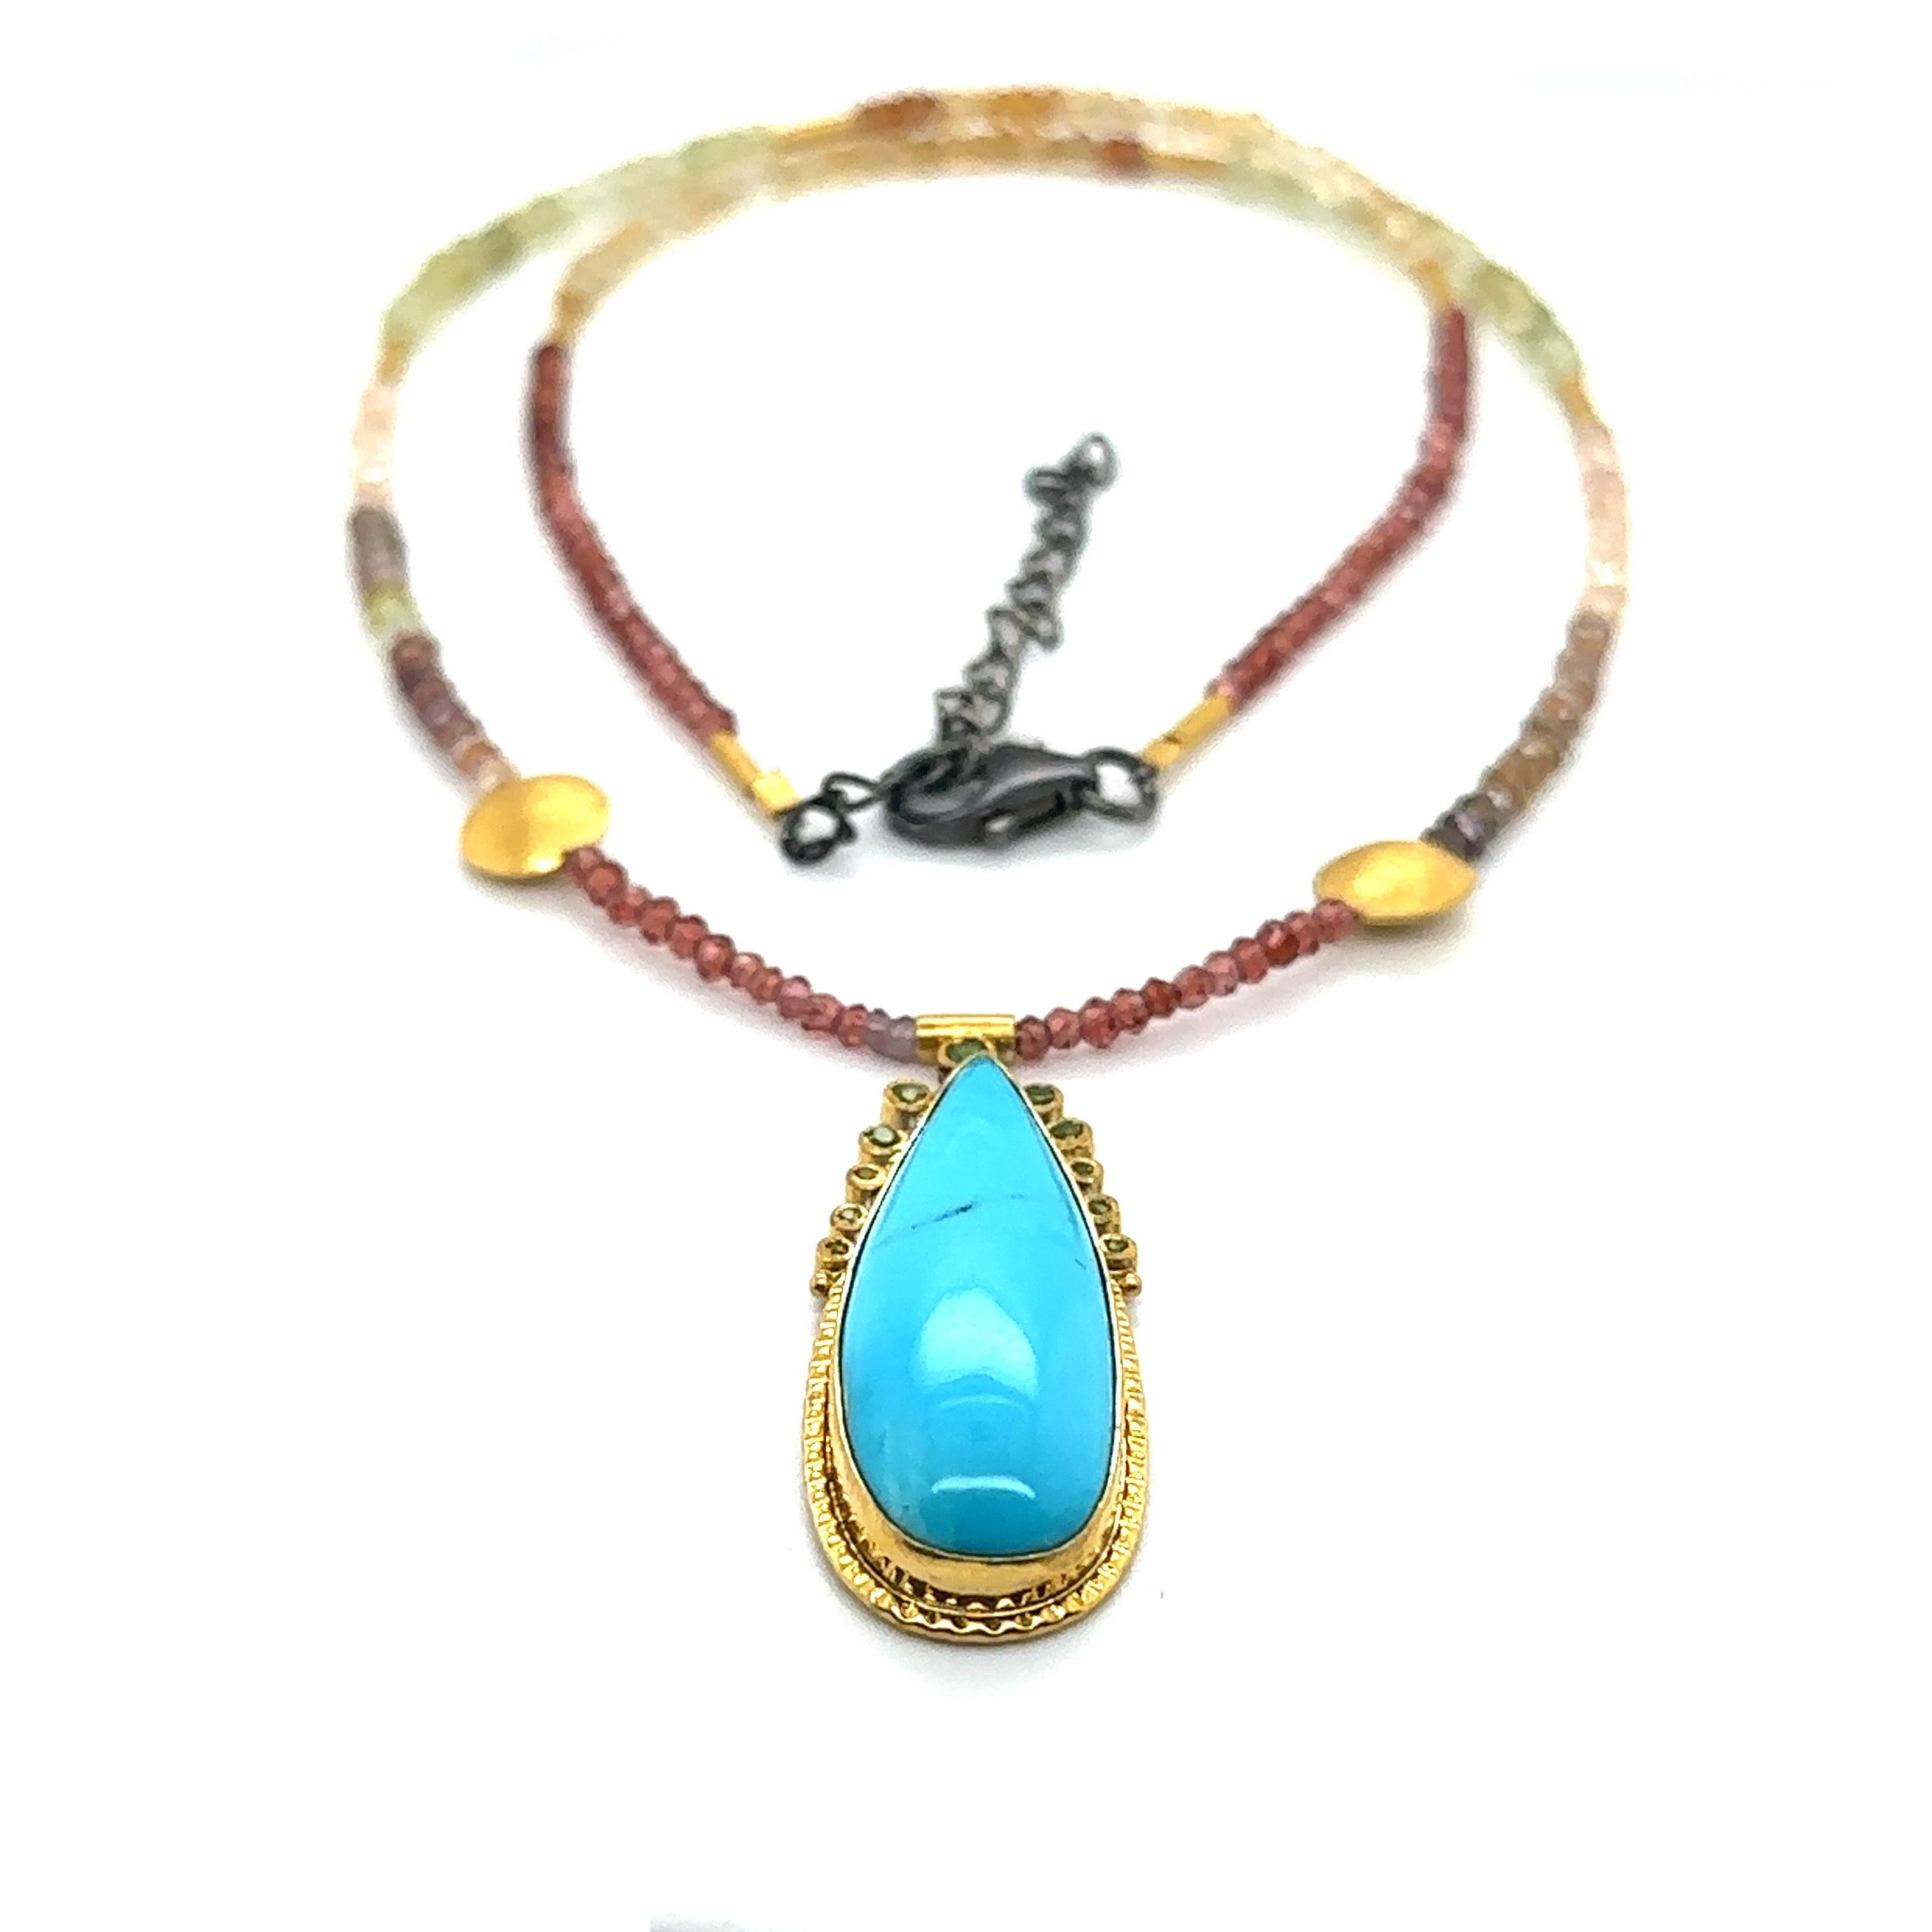 JAS-19-1845 - 24K GOLD/STERLING SILVER w KINGMAN TURQUOISE & MULTI COLOR BEADS For Sale 2